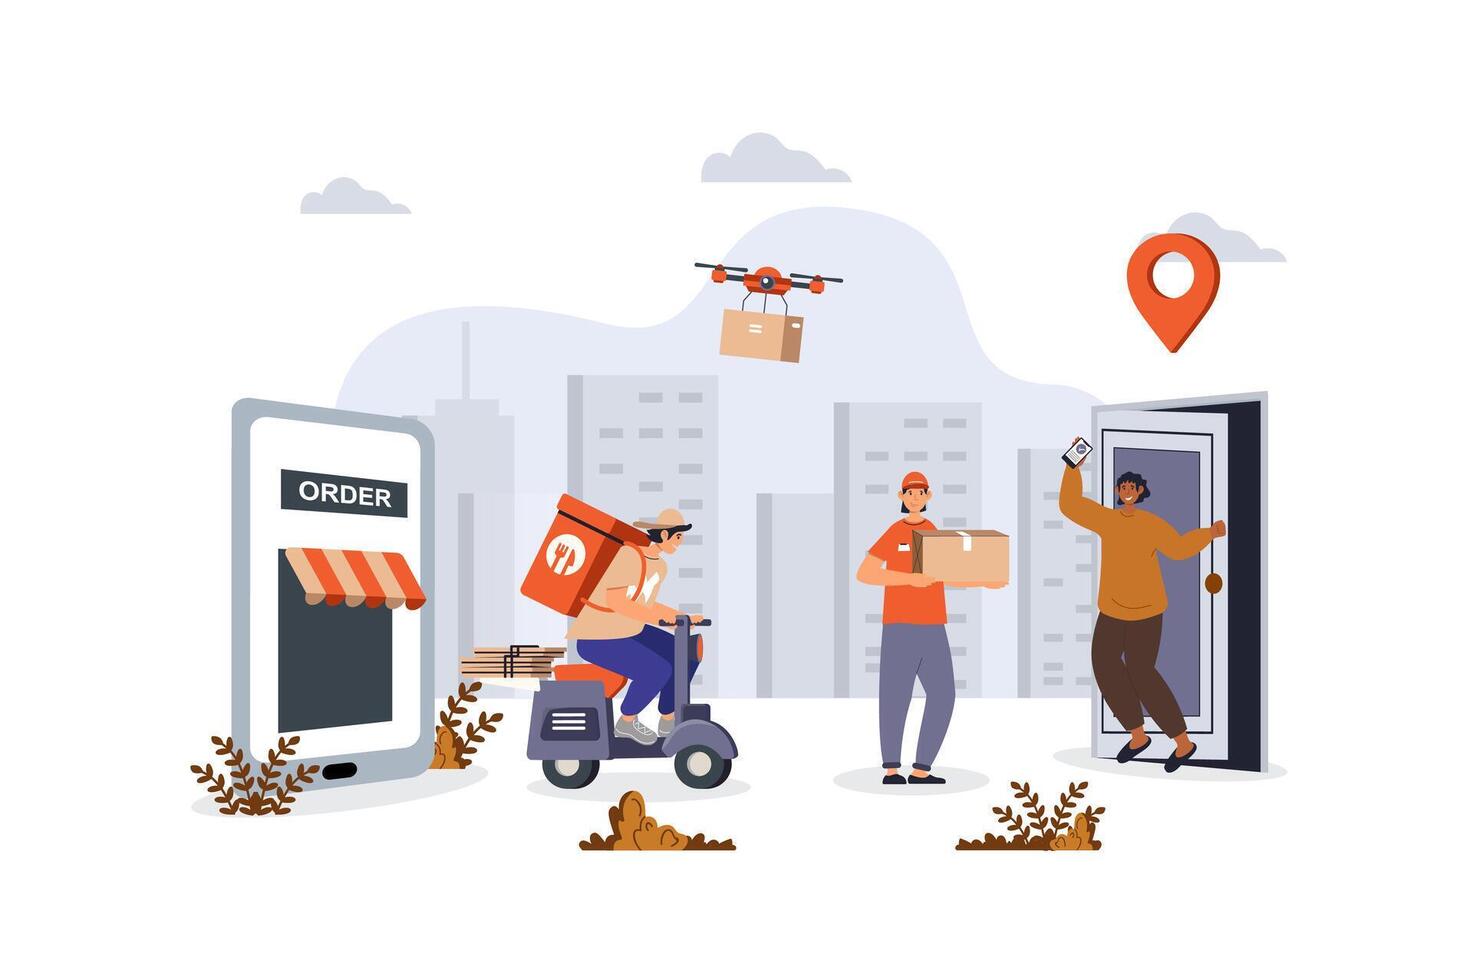 Delivery concept with character scene for web. Client using shipping service, courier delivering and drone flying packages. People situation in flat design. Vector illustration for marketing material.